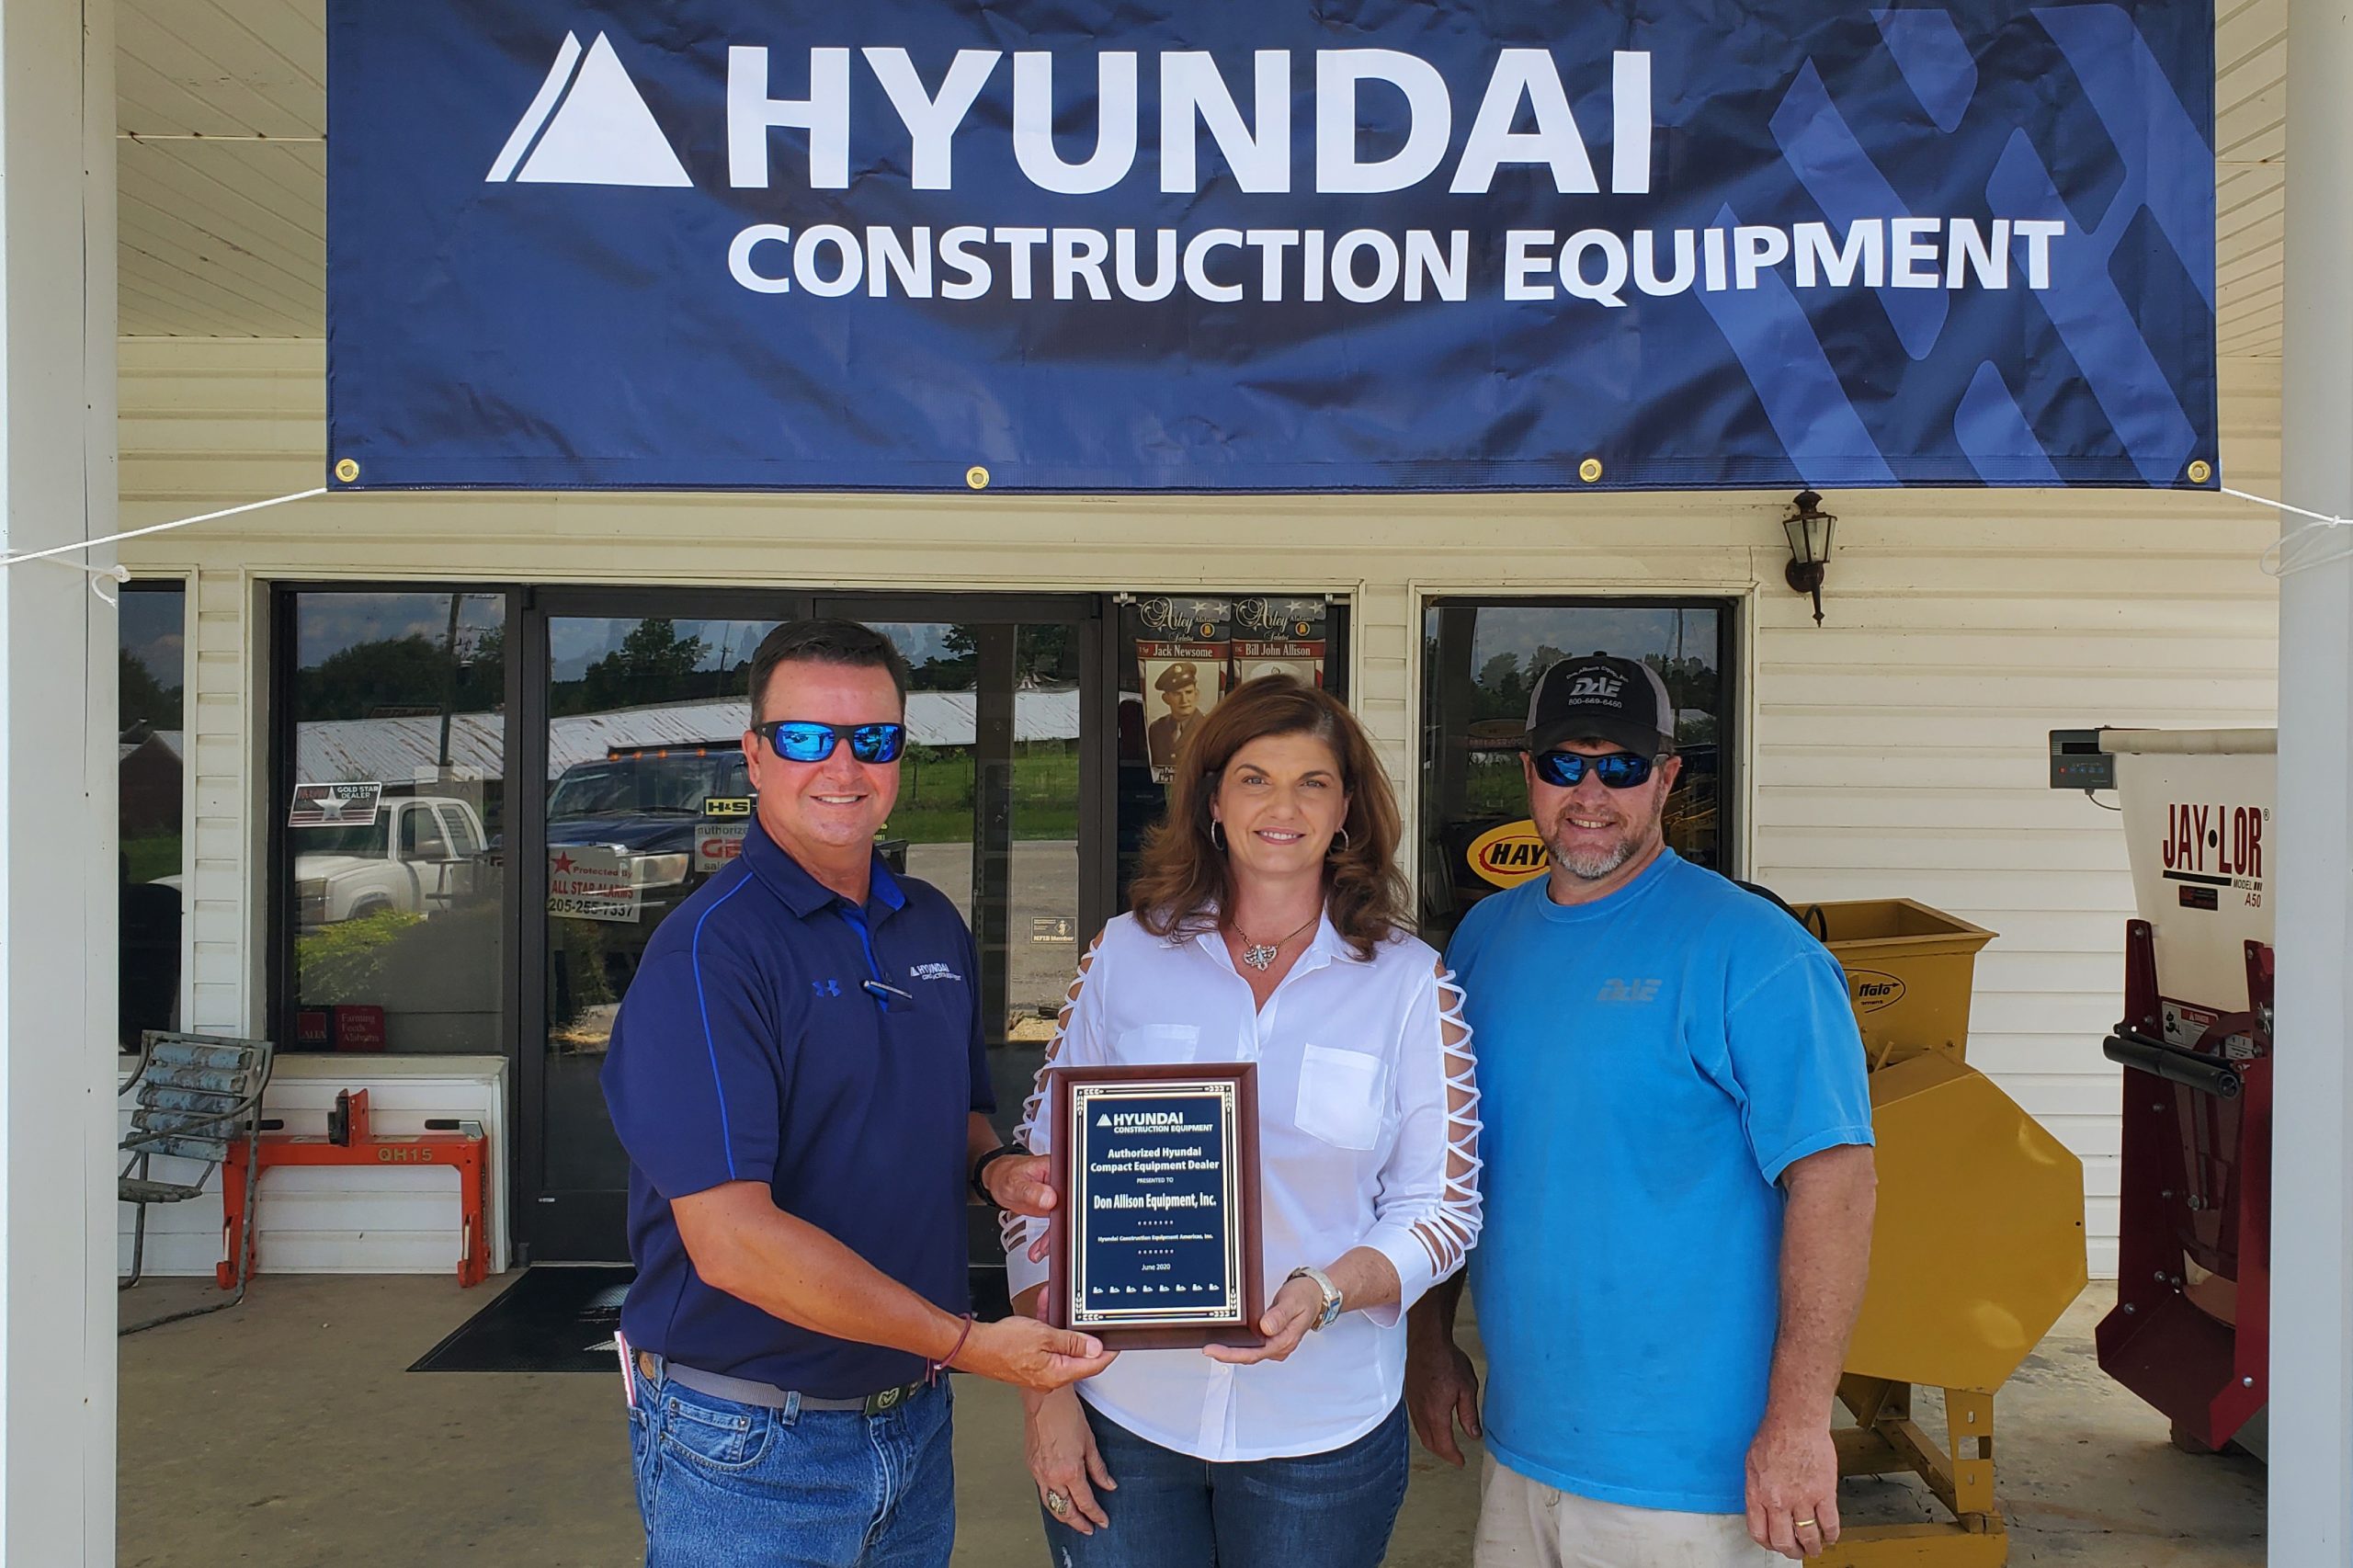 Hyundai Construction Equipment Adds Don Allison Equipment to Growing North American Distribution Network